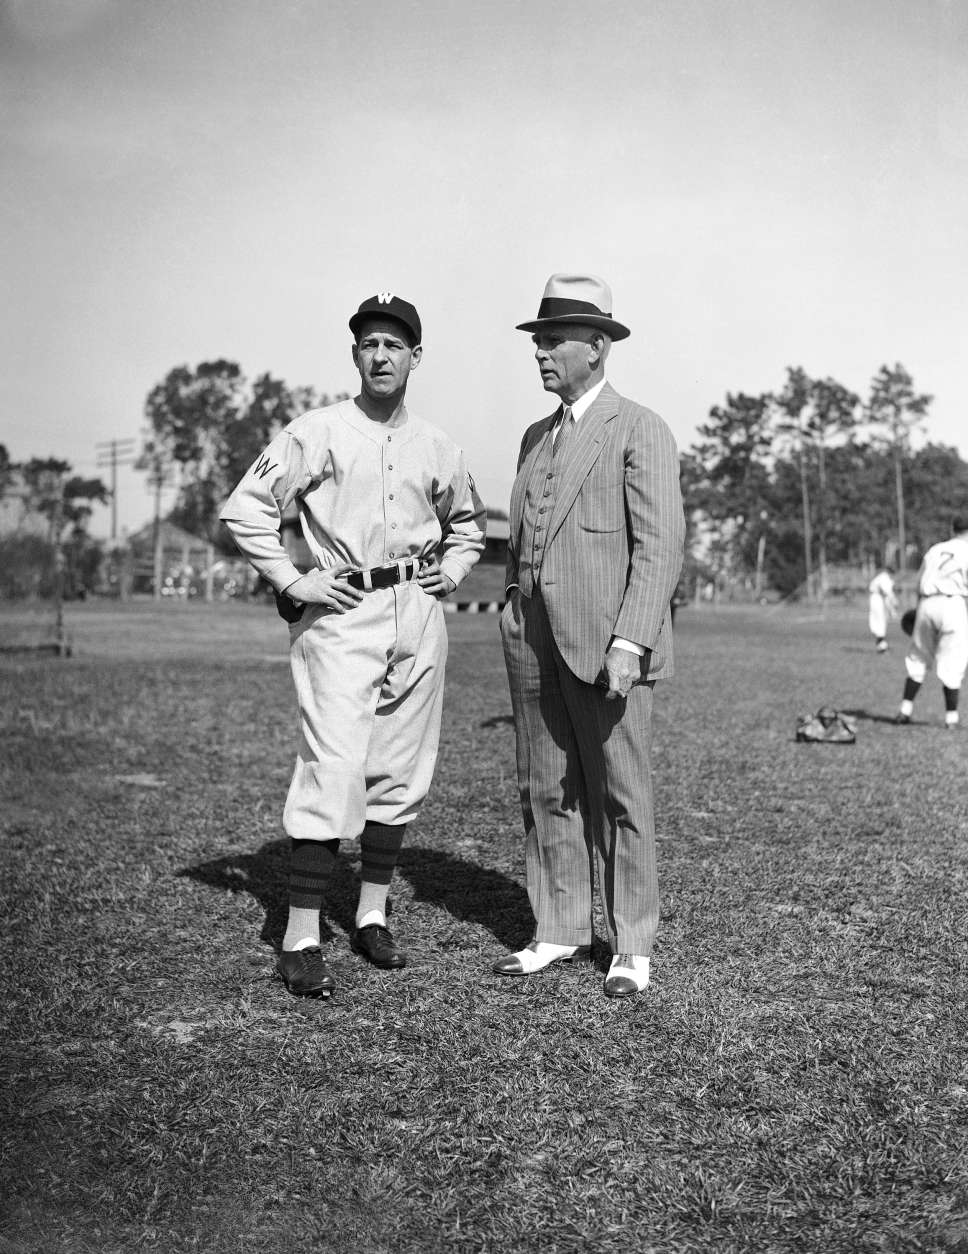 Back in his old post as manager of the Washington Senators, Stanley (Bucky) Harris, left, compares notes with owner Clark Griffith as the team starts spring training in Orlando, Florida, Feb. 26, 1936. (AP Photo)